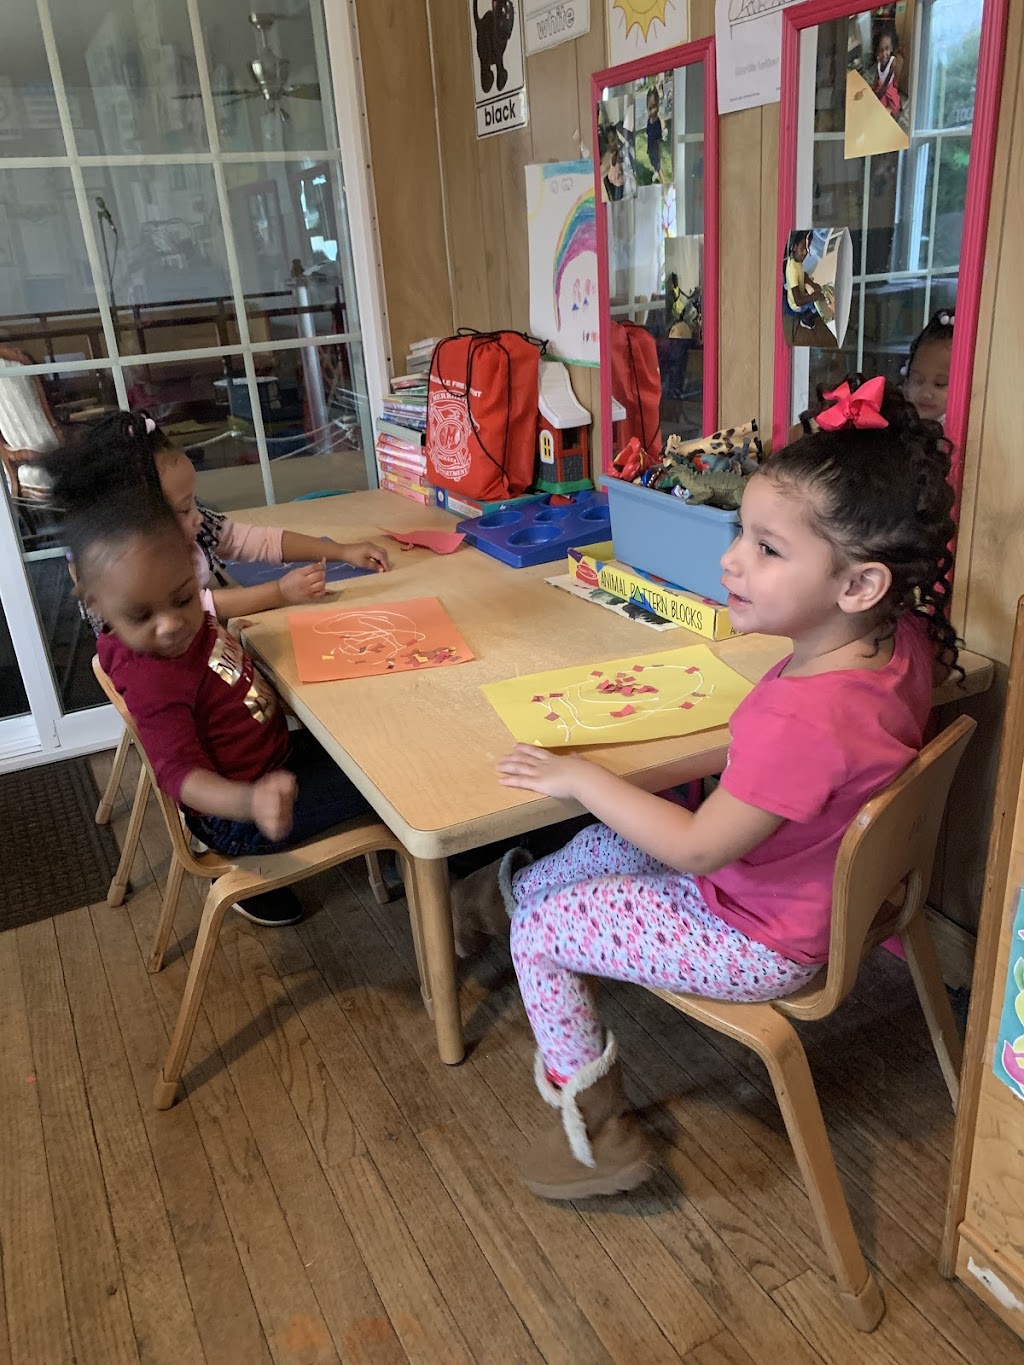 Little Fishers Early learning Childcare | 4927 Virginia St, Gary, IN 46409, USA | Phone: (219) 980-9233